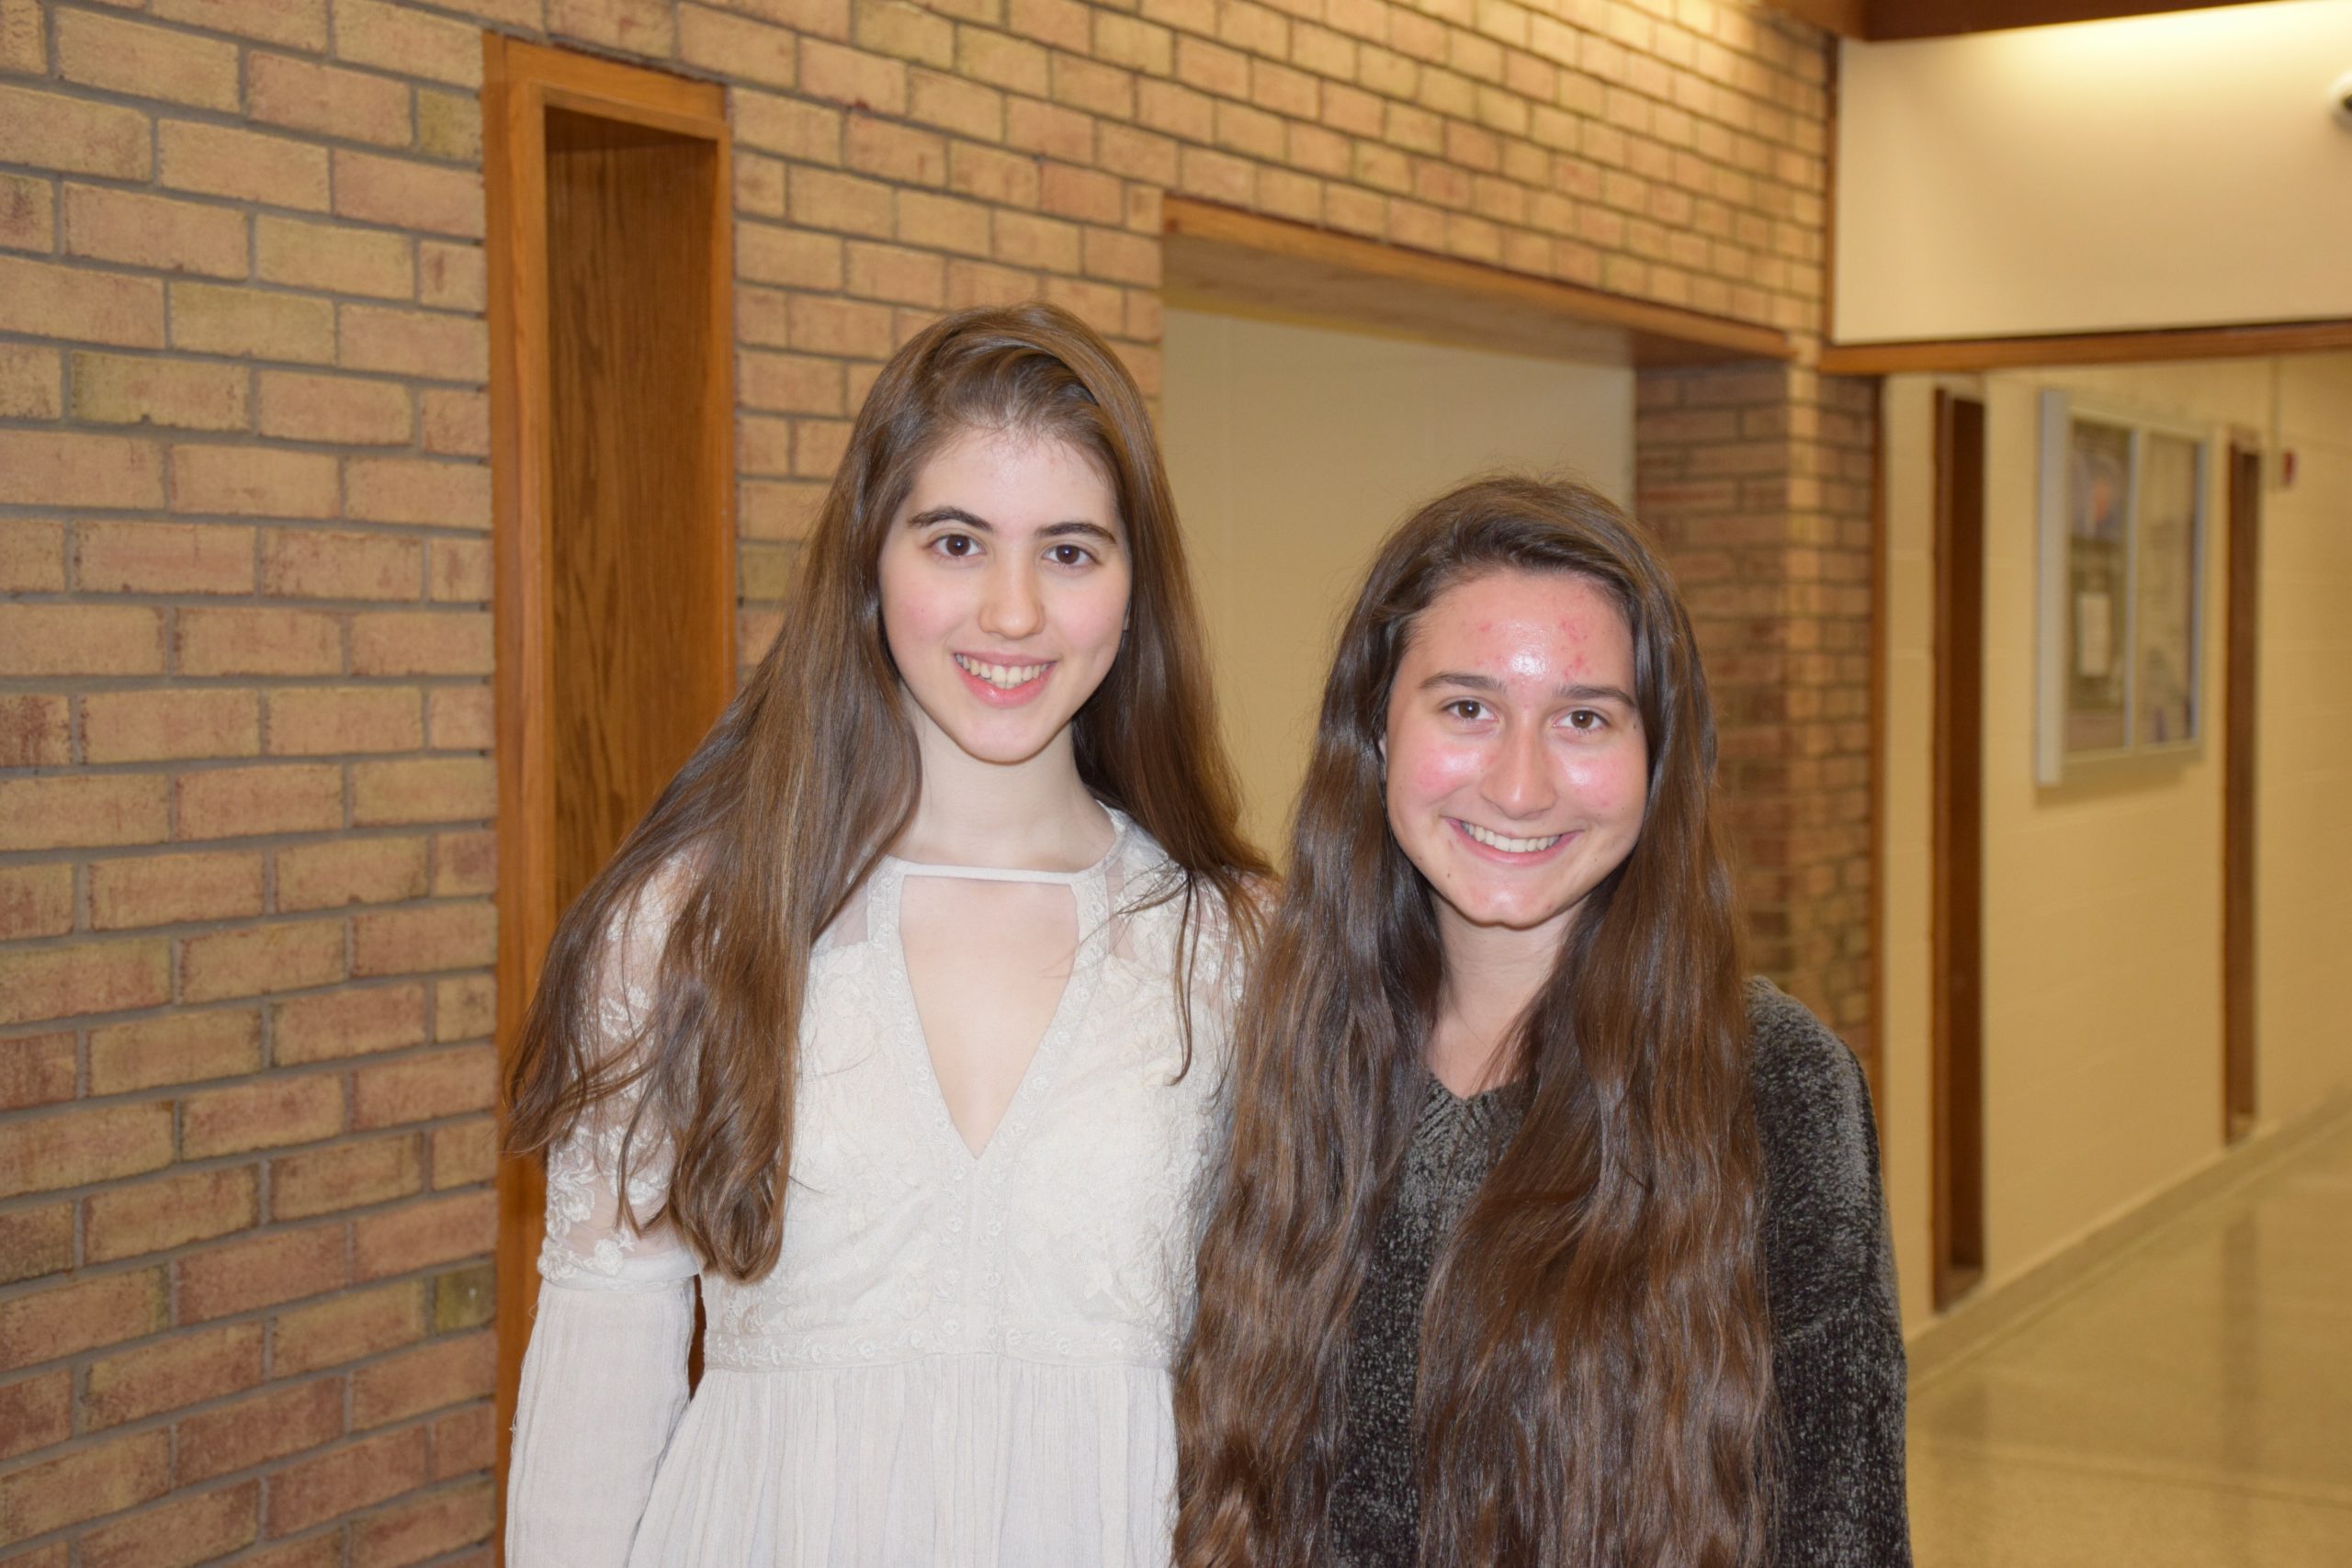 Hampton Bays High School seniors Skye McMorris, left, and Gabrielle Caine have been named National Merit Commended Students. In addition to their studies, both students are involved in their school. Gabrielle is a member of the Interact and Rotary Youth Leadership clubs. She also sings, plays the cello and is the founder of the Healthy Harmony Club, a group of student musicians who perform at area nursing homes. She intends to pursue studies in the music industry in college. Skye is a science research student and a member of her school’s Key Club, Interact Club and Science Olympiad team. She also plays volleyball. She plans to study biochemistry in college.